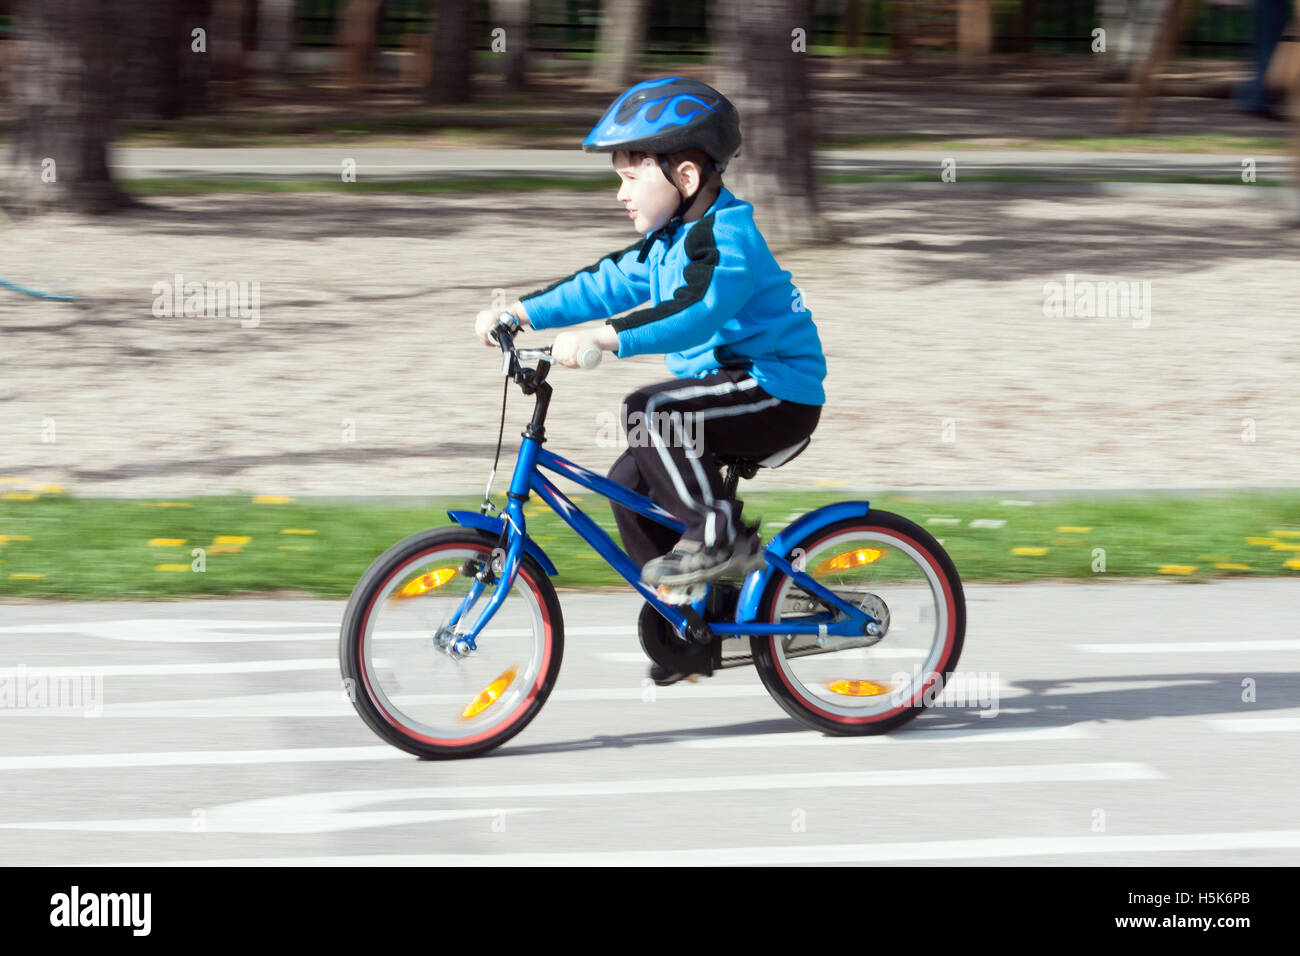 child on a bicycle at asphalt road on traffic playground - blurred panning method Stock Photo